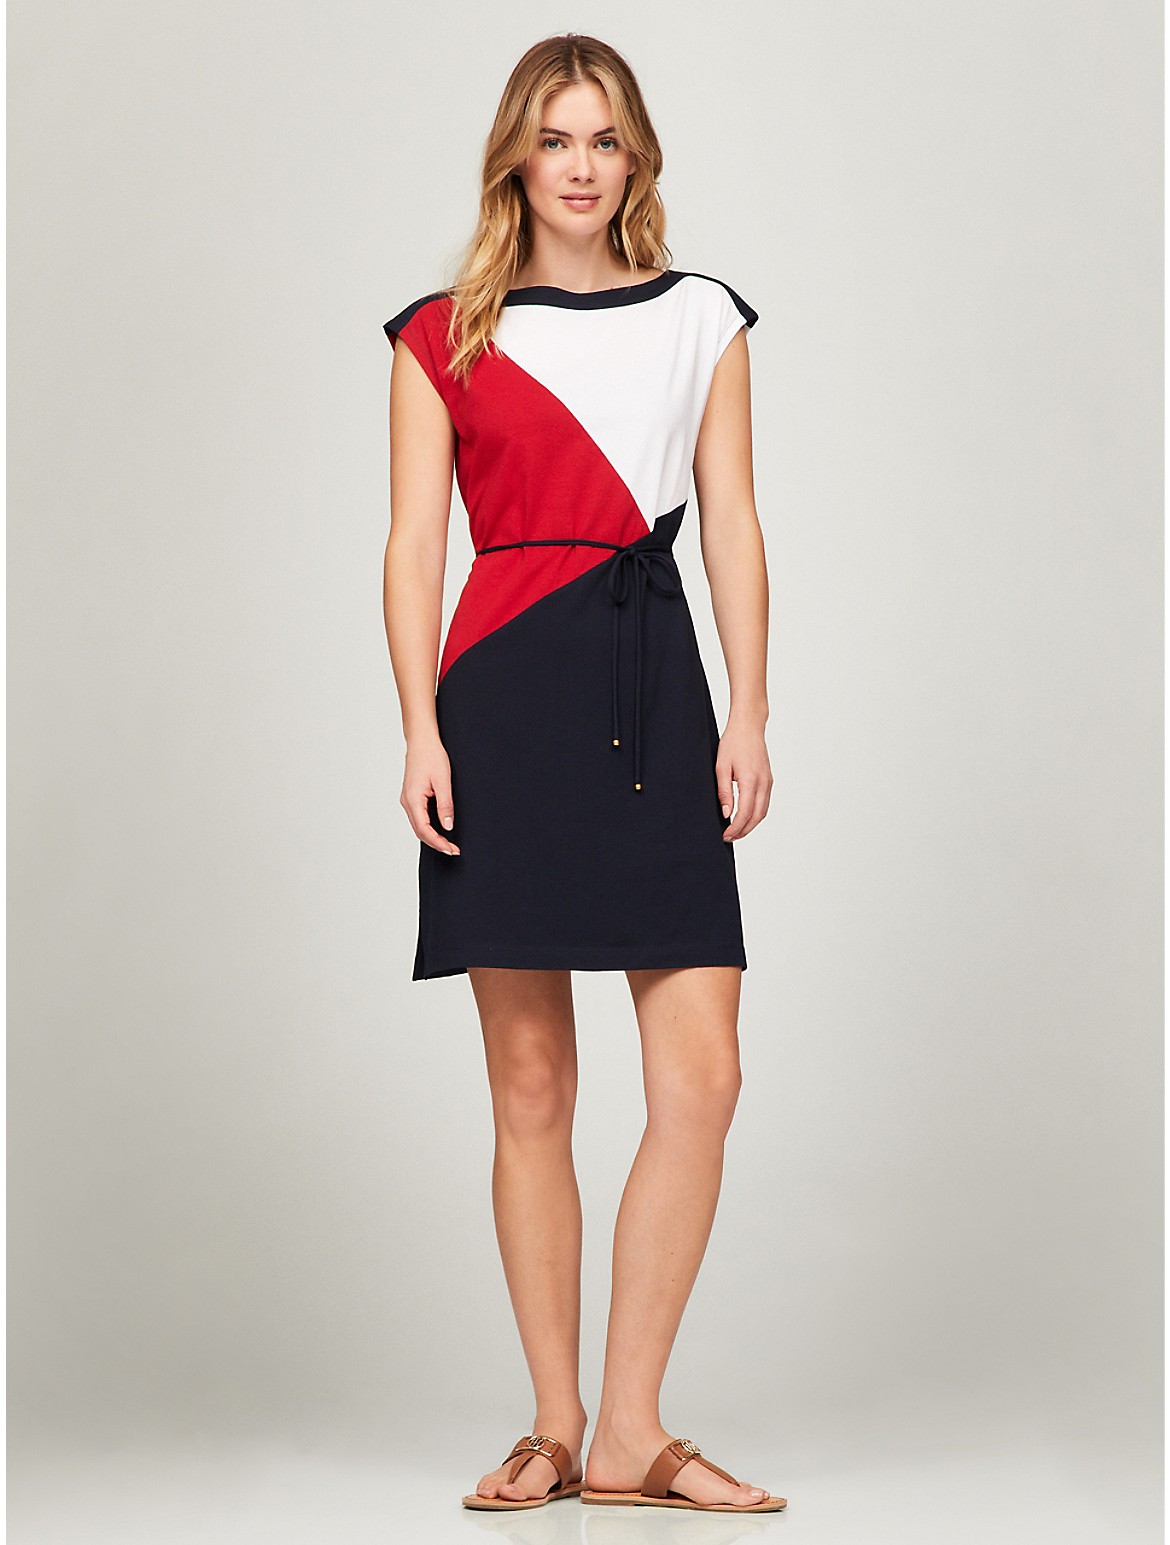 Tommy Hilfiger Women's Belted Colorblock Stretch Cotton Dress